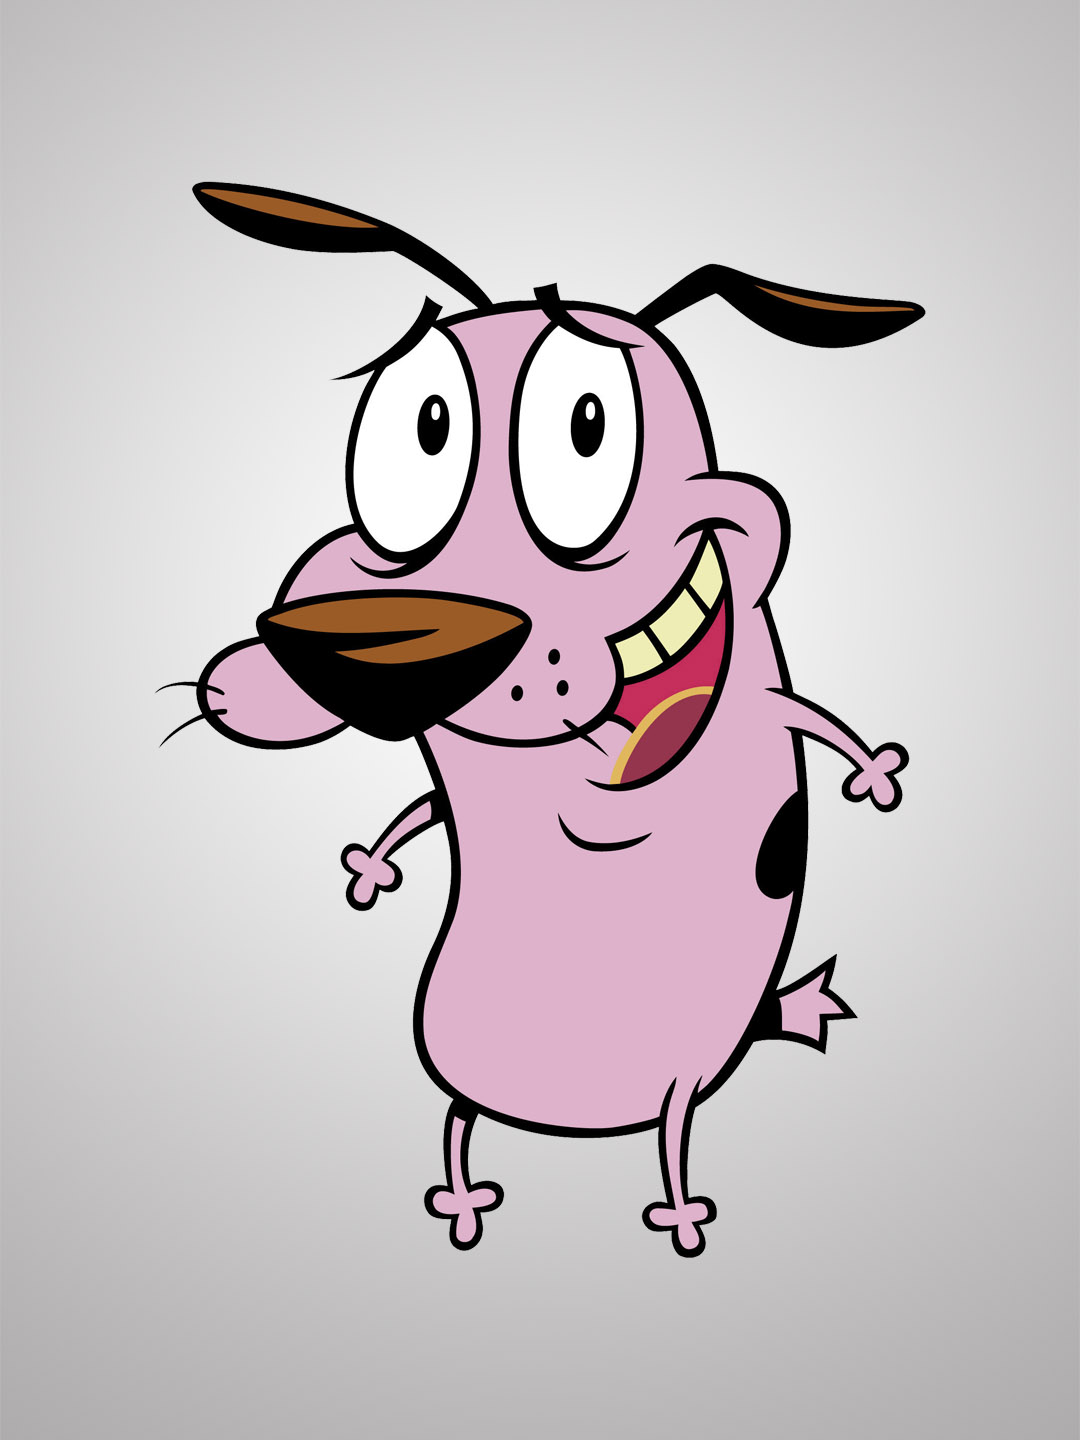 Courage the Cowardly Dog - Rotten Tomatoes